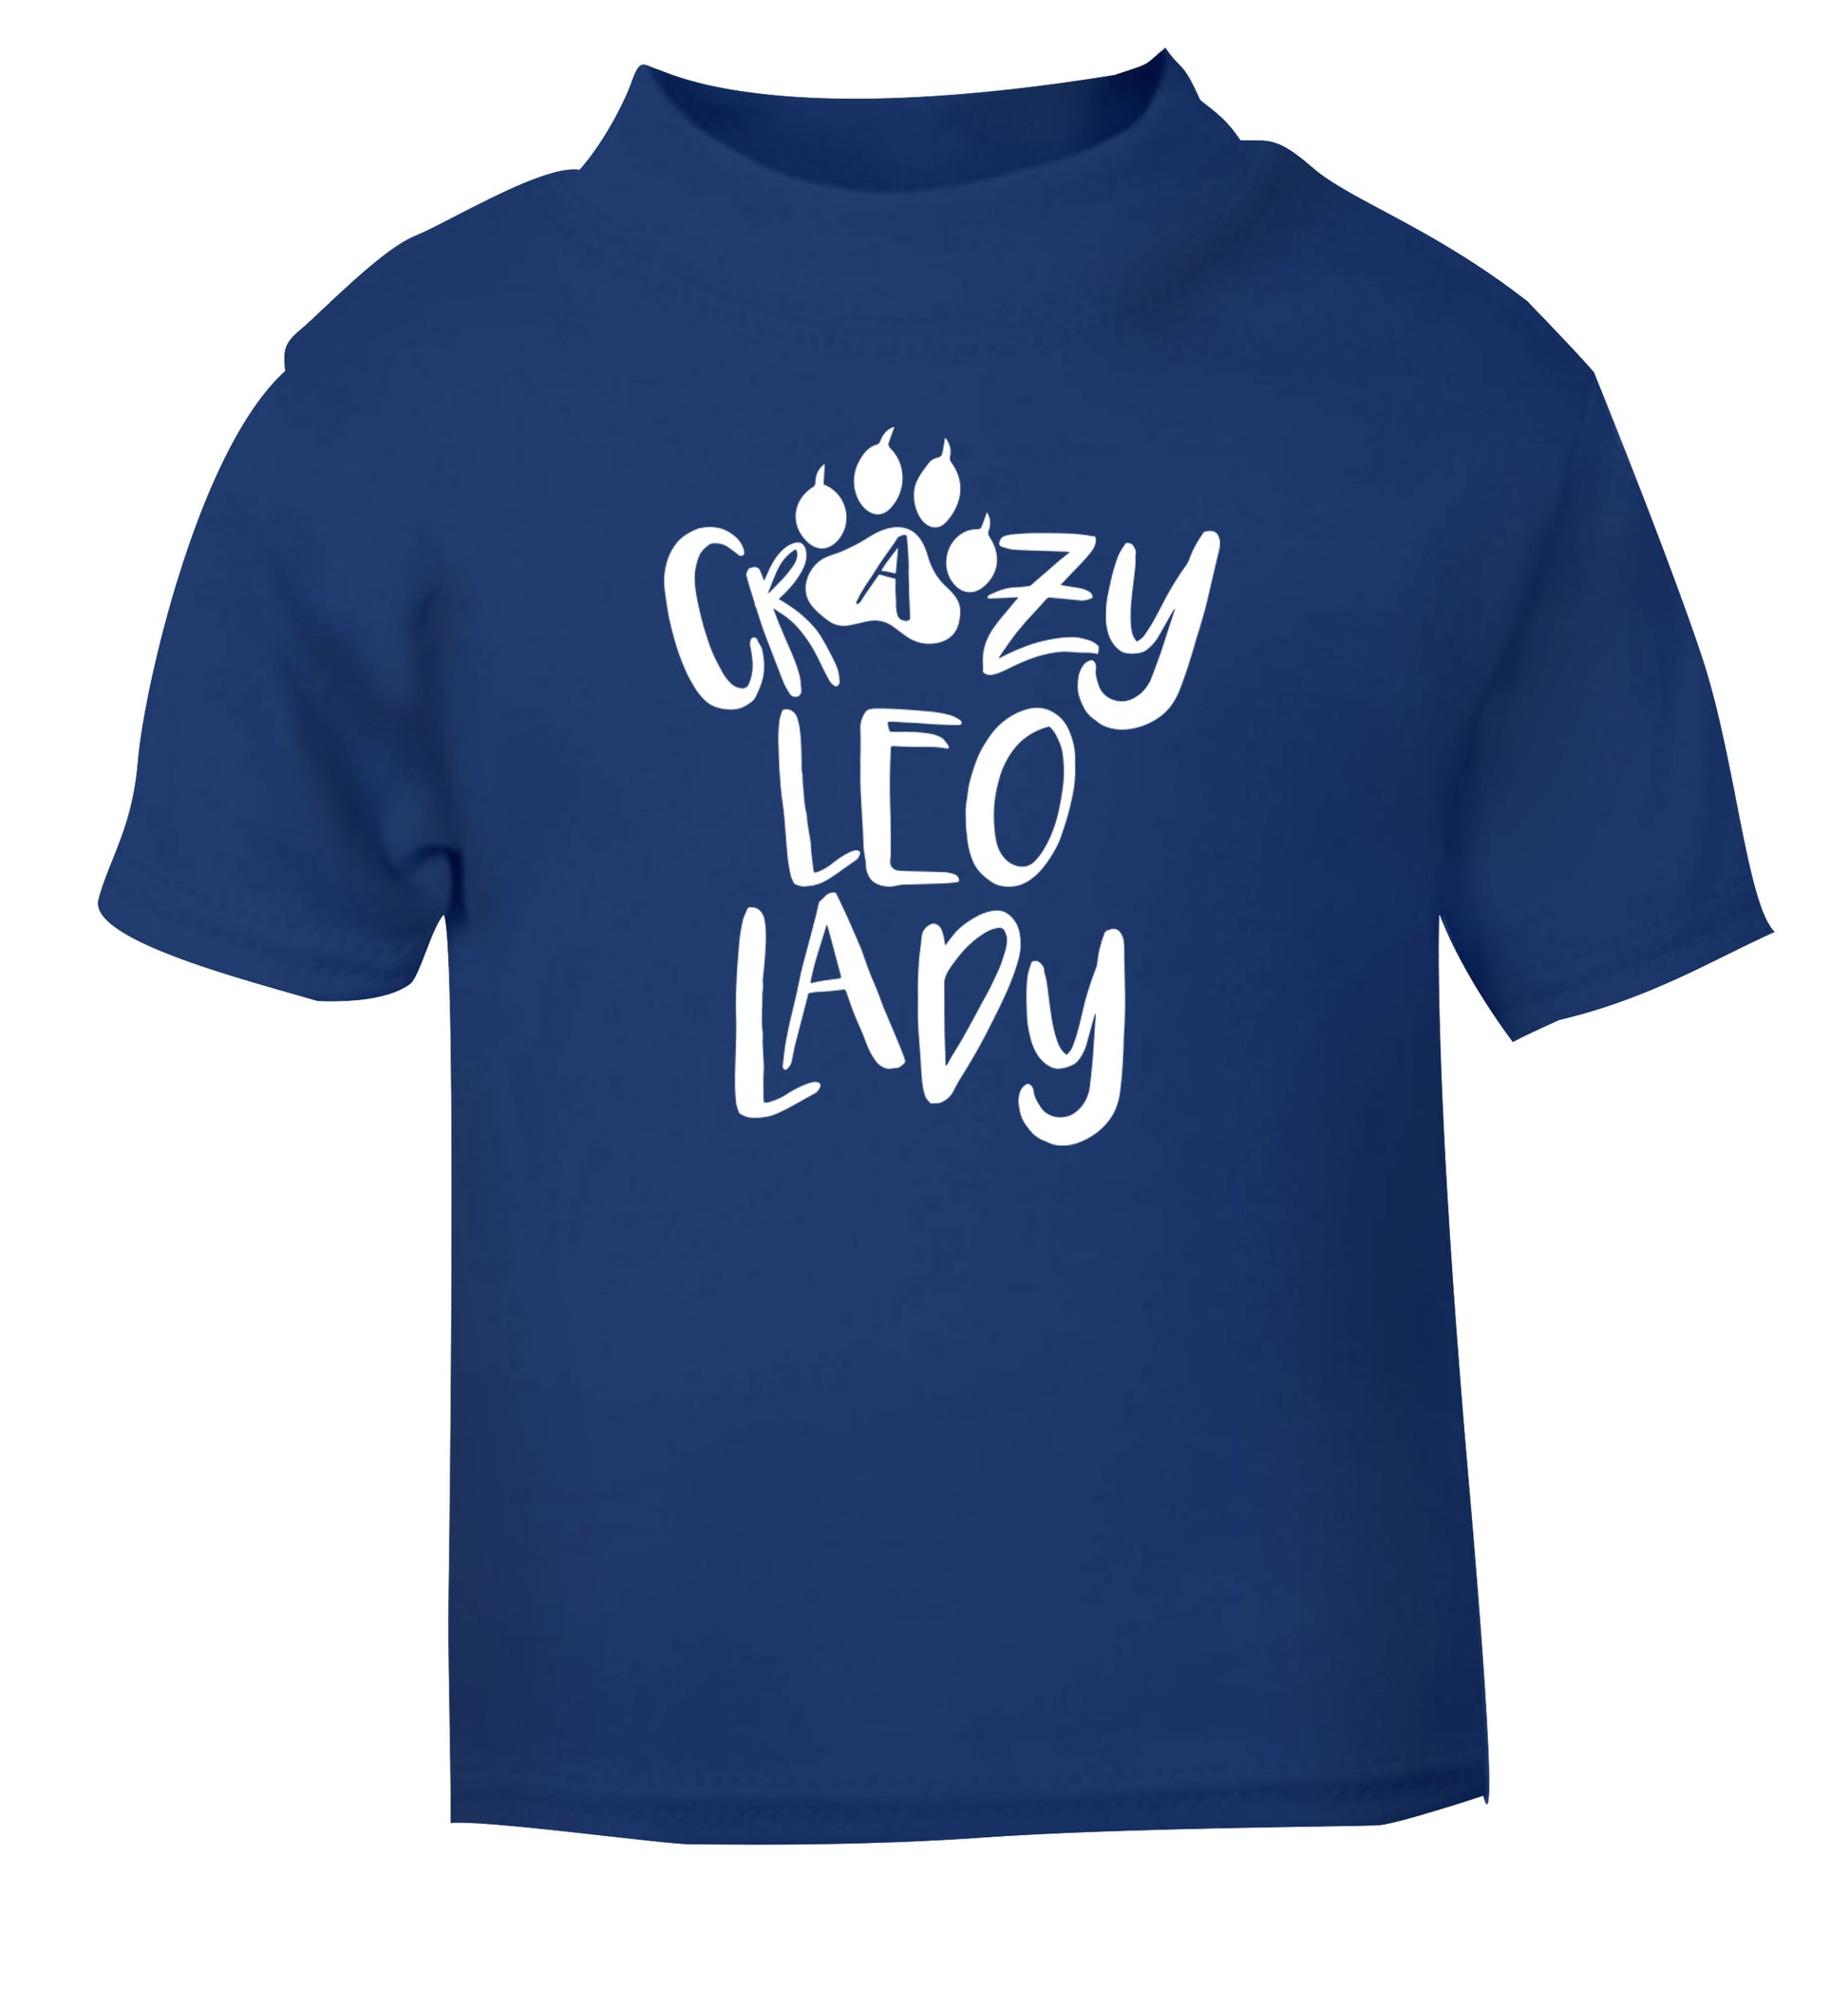 Crazy leo lady blue Baby Toddler Tshirt 2 Years